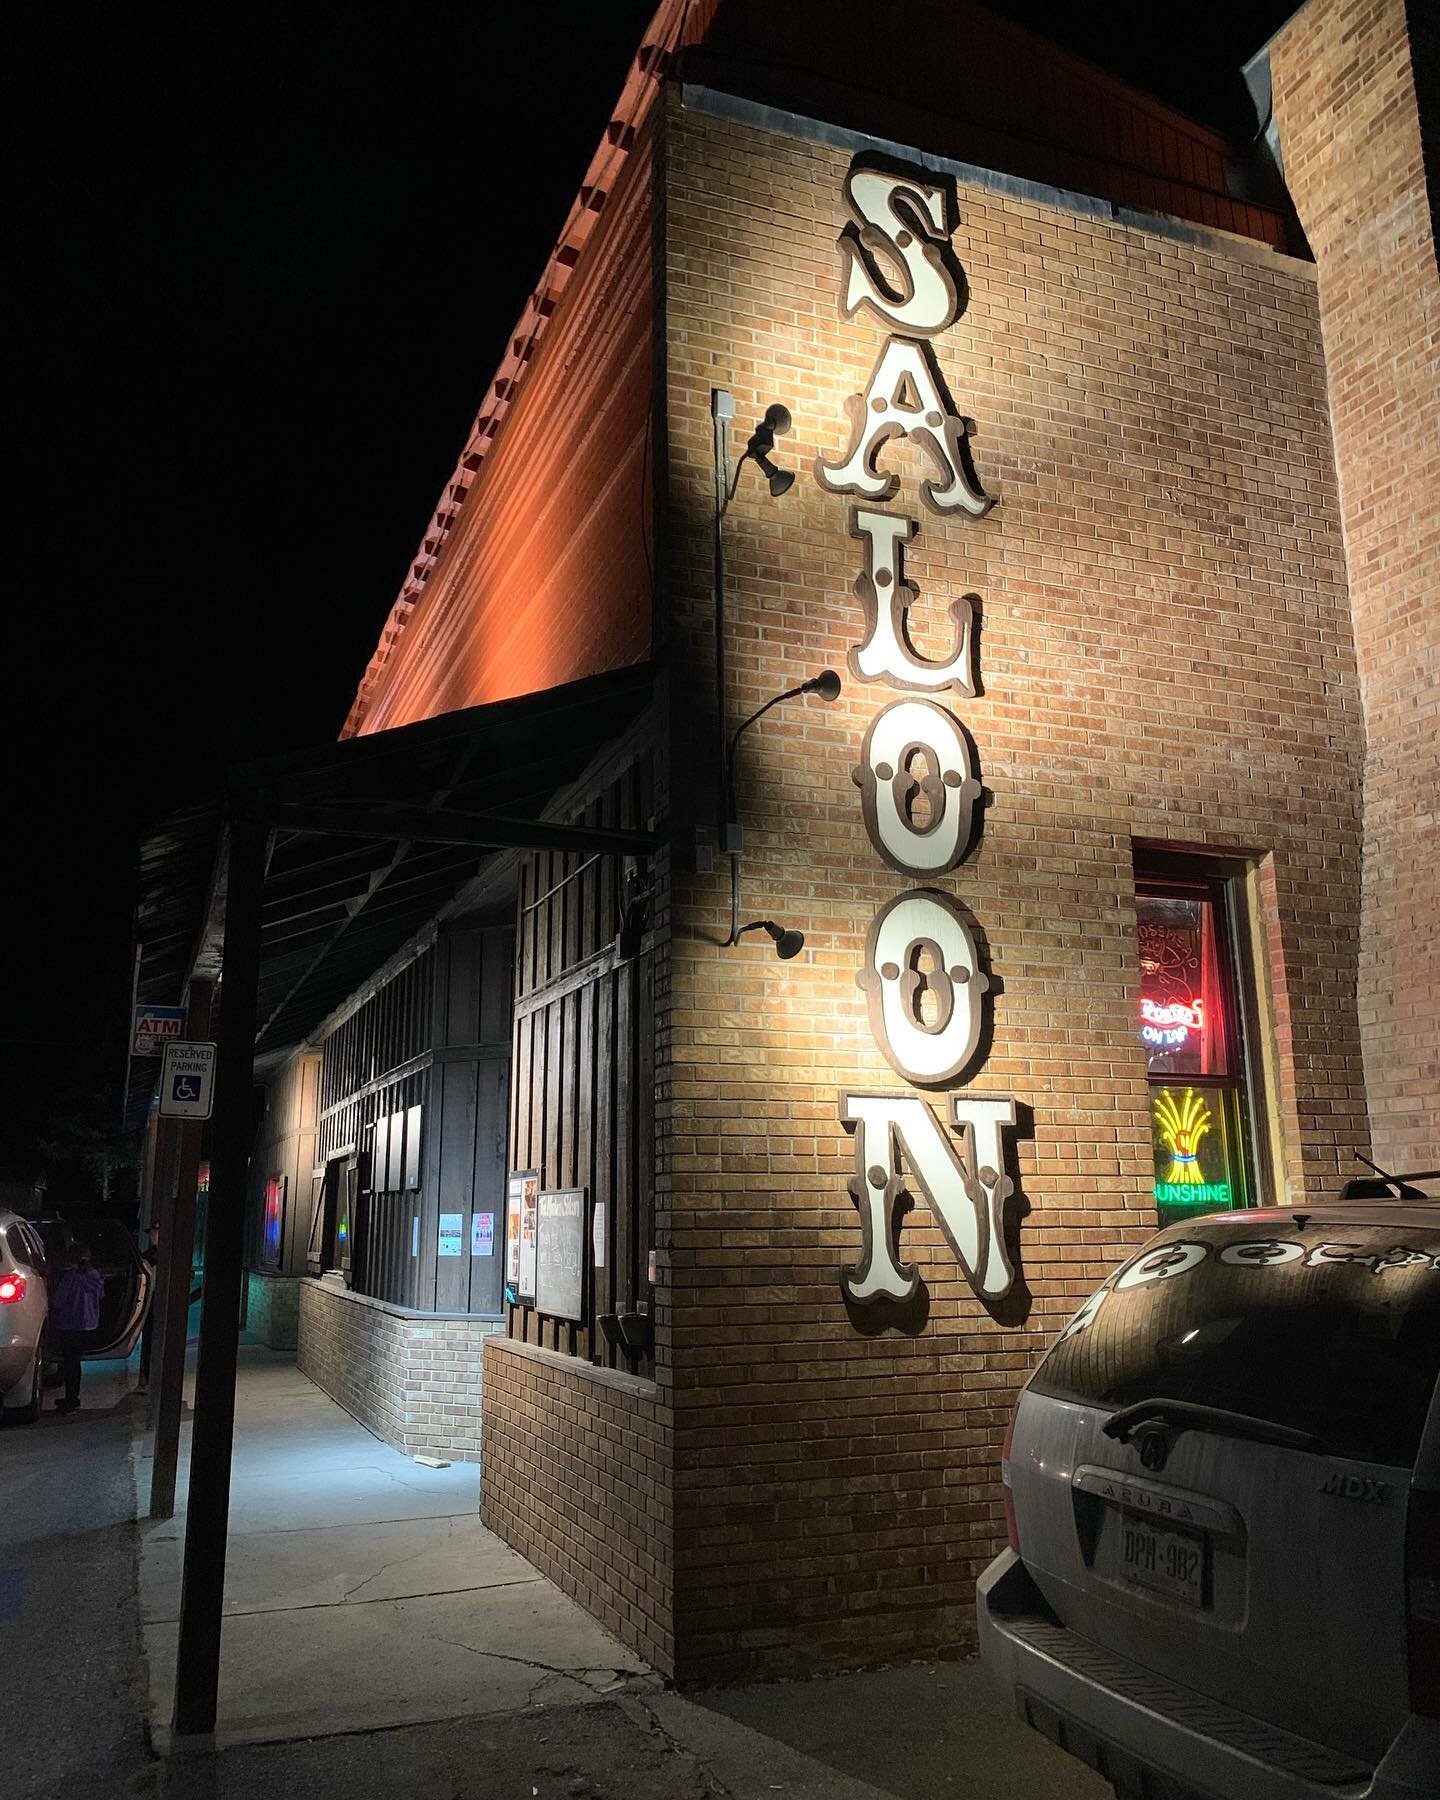 Impromptu dinner at The Saloon in Minturn tonight. It was so nice to be back in there any enjoy the atmosphere. I think the next time I stop in will be for a drink after the Mile. Now we just need it to snow!! #minturn #minturnsaloon #dinner #familyt